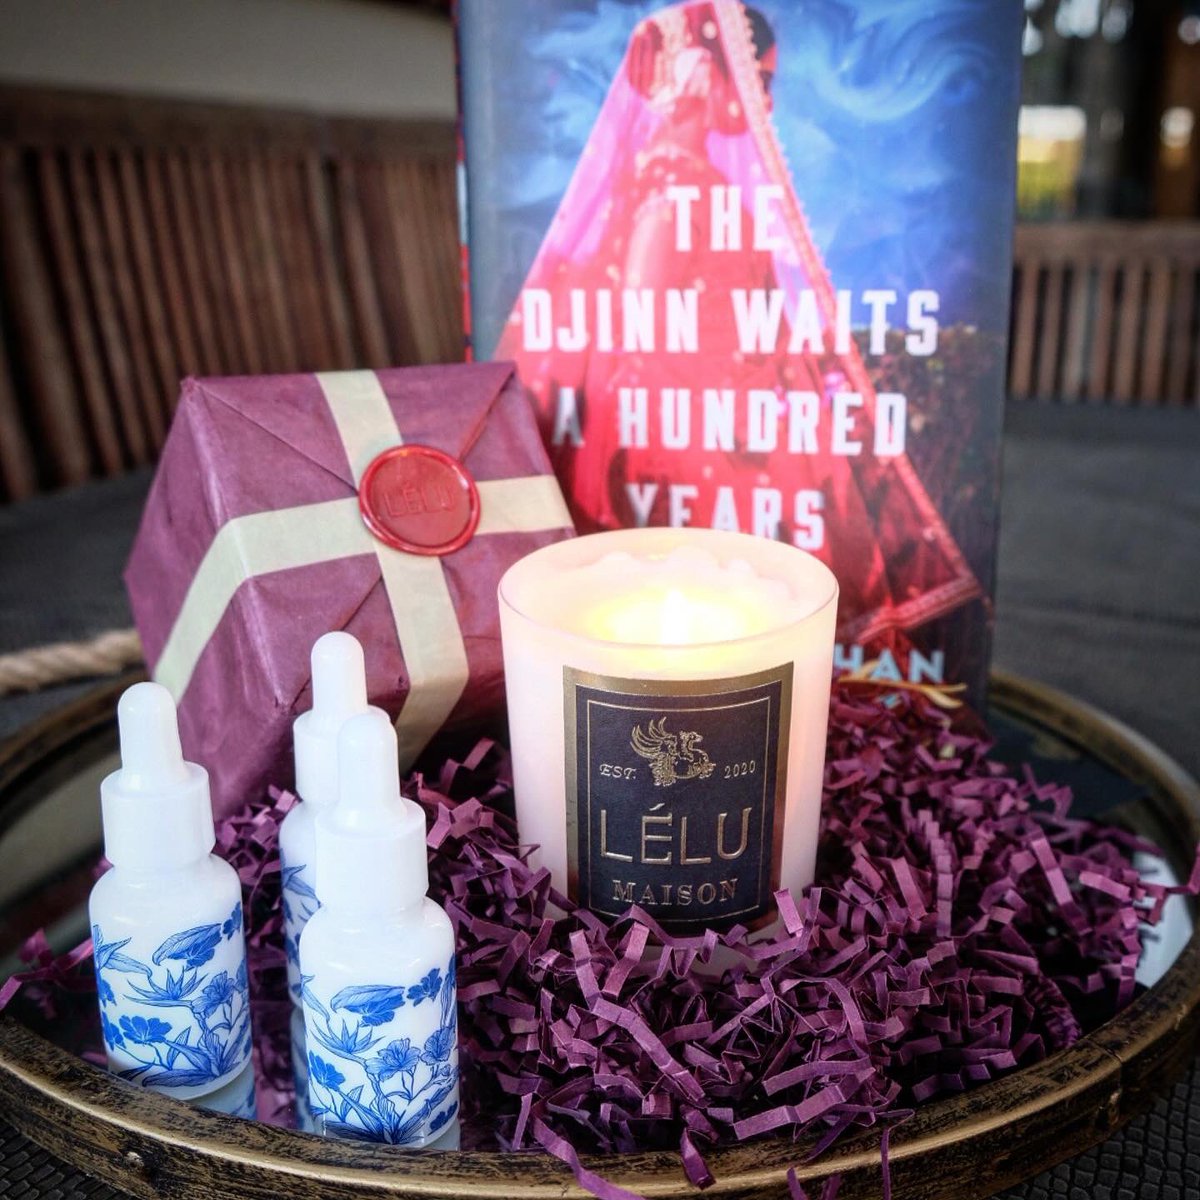 A reader in the US reached out to say she loved my novel and it made her believe in love again. She was inspired to create these candles and scents representing the characters and inspired by the journey the novel took her on. She just sent them to me and they are truly magical.